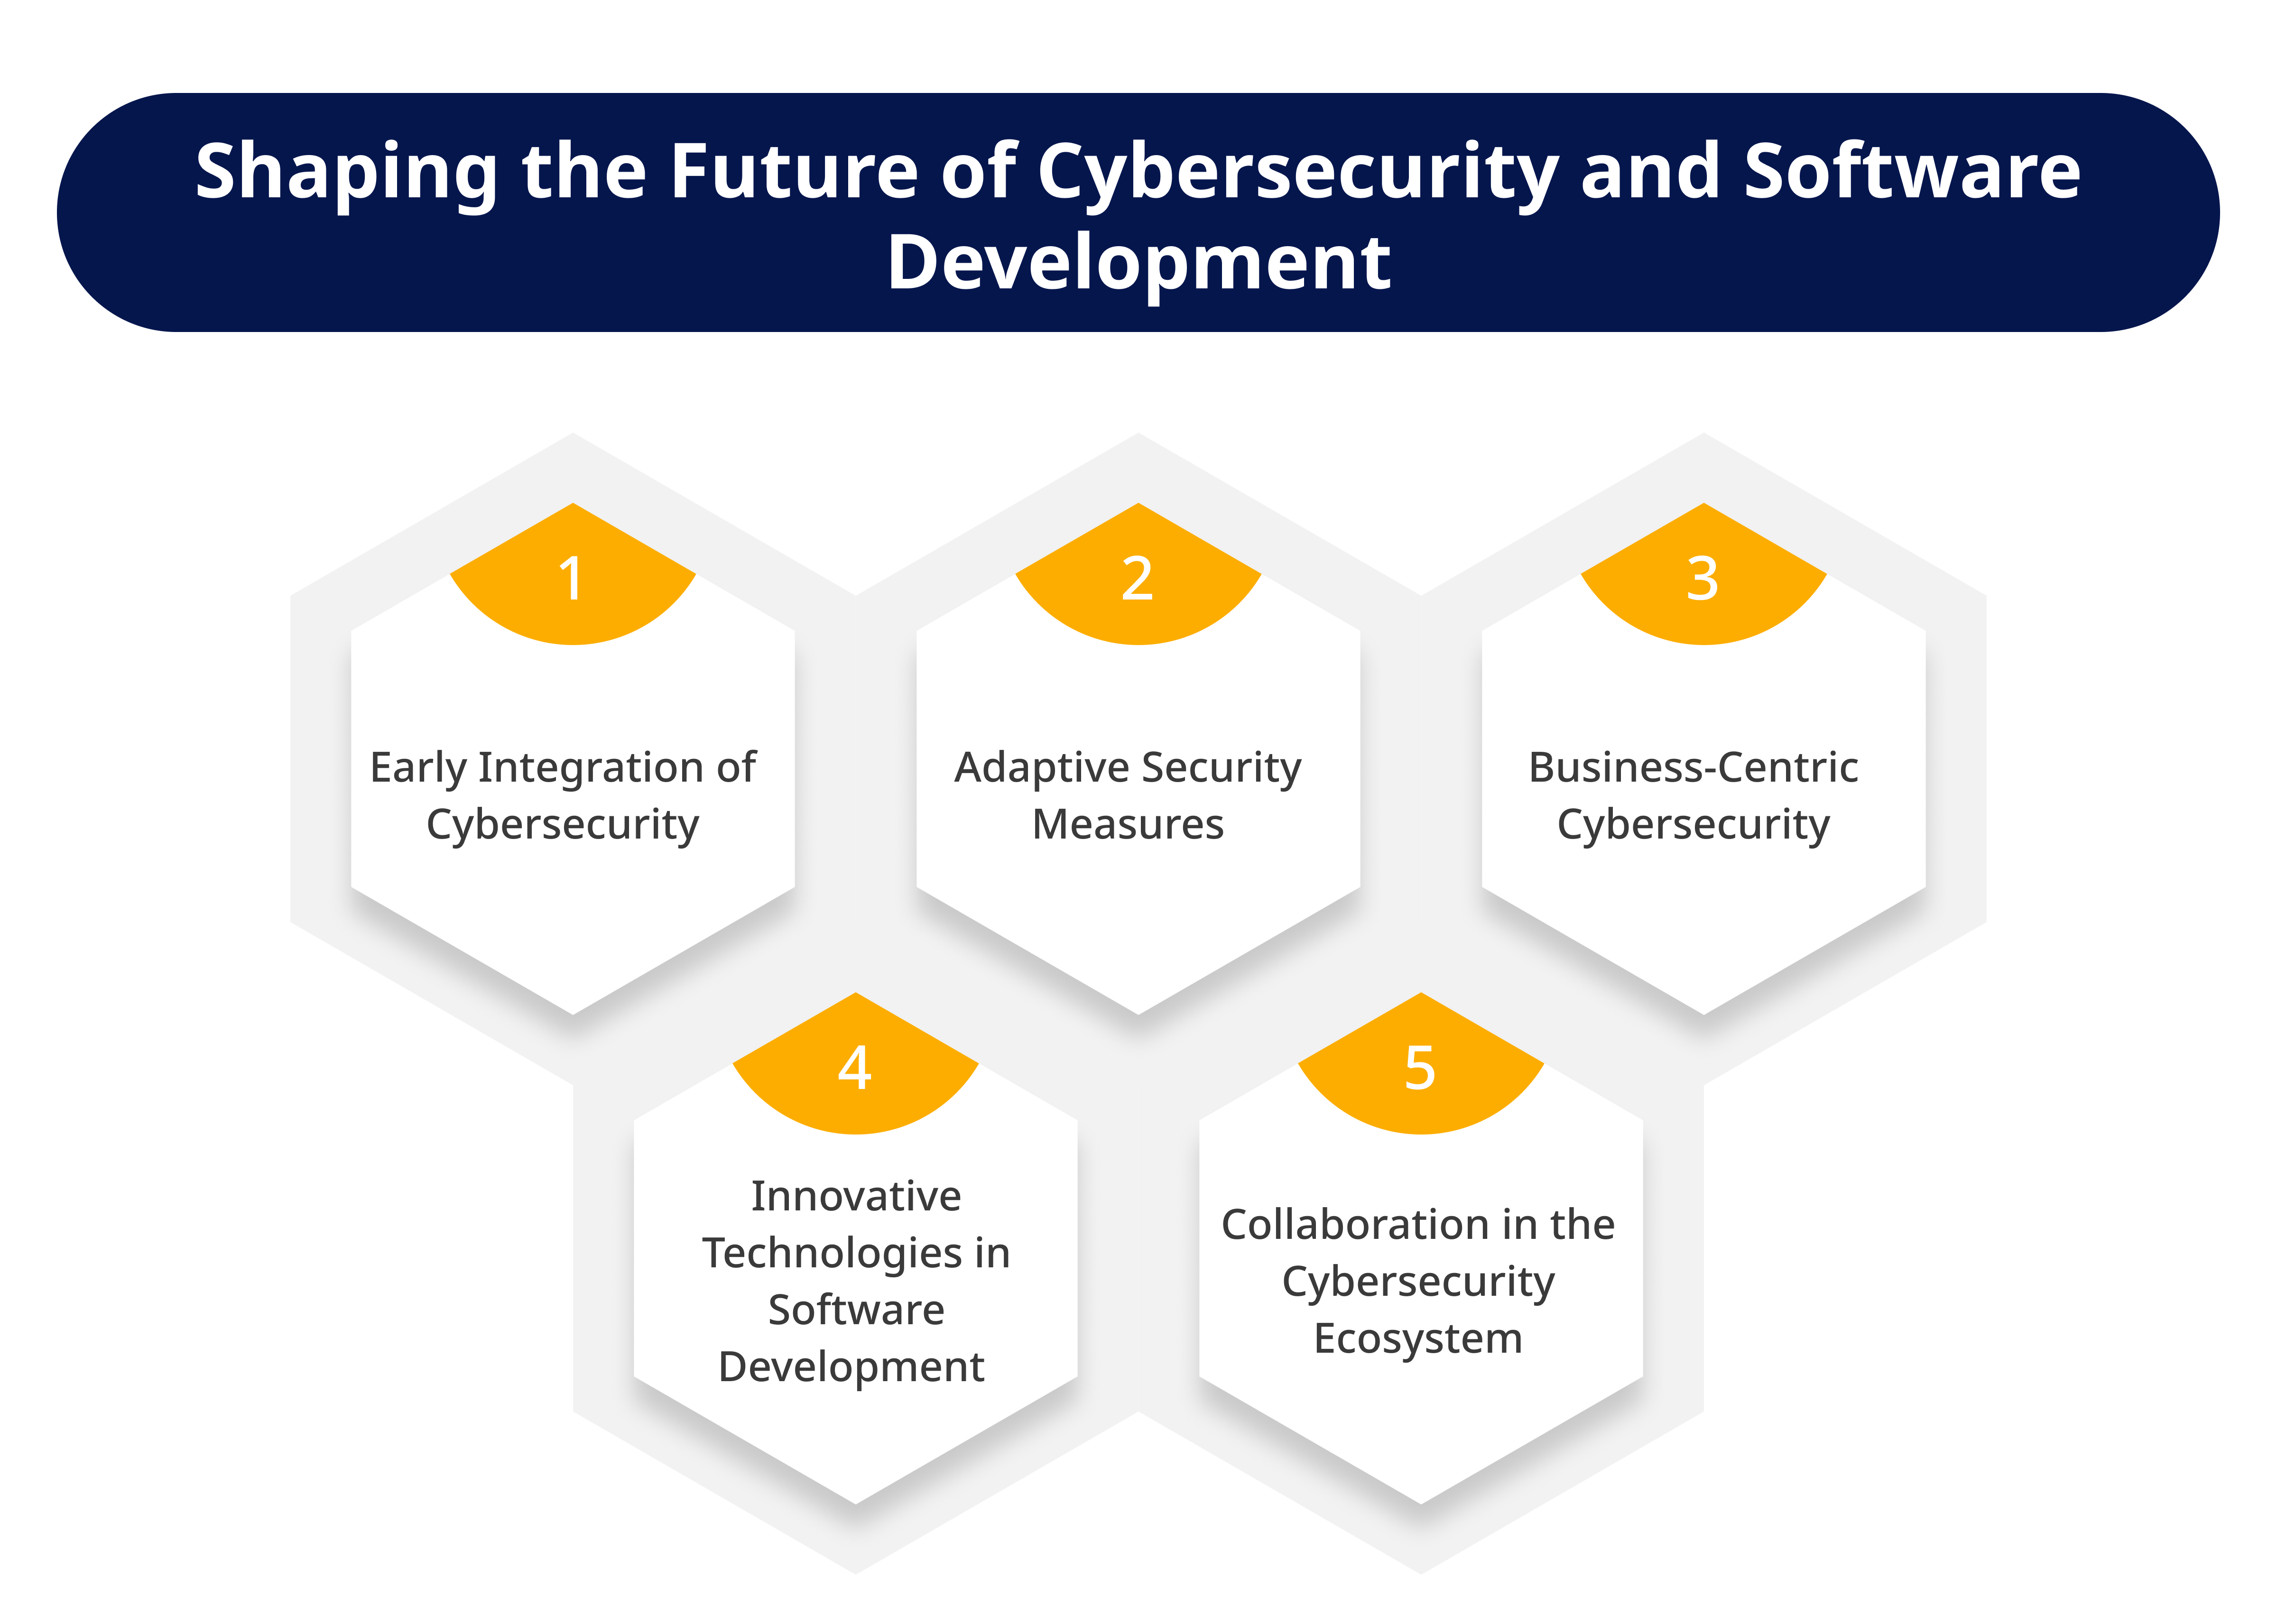 Future Trends in Cybersecurity and Software Development